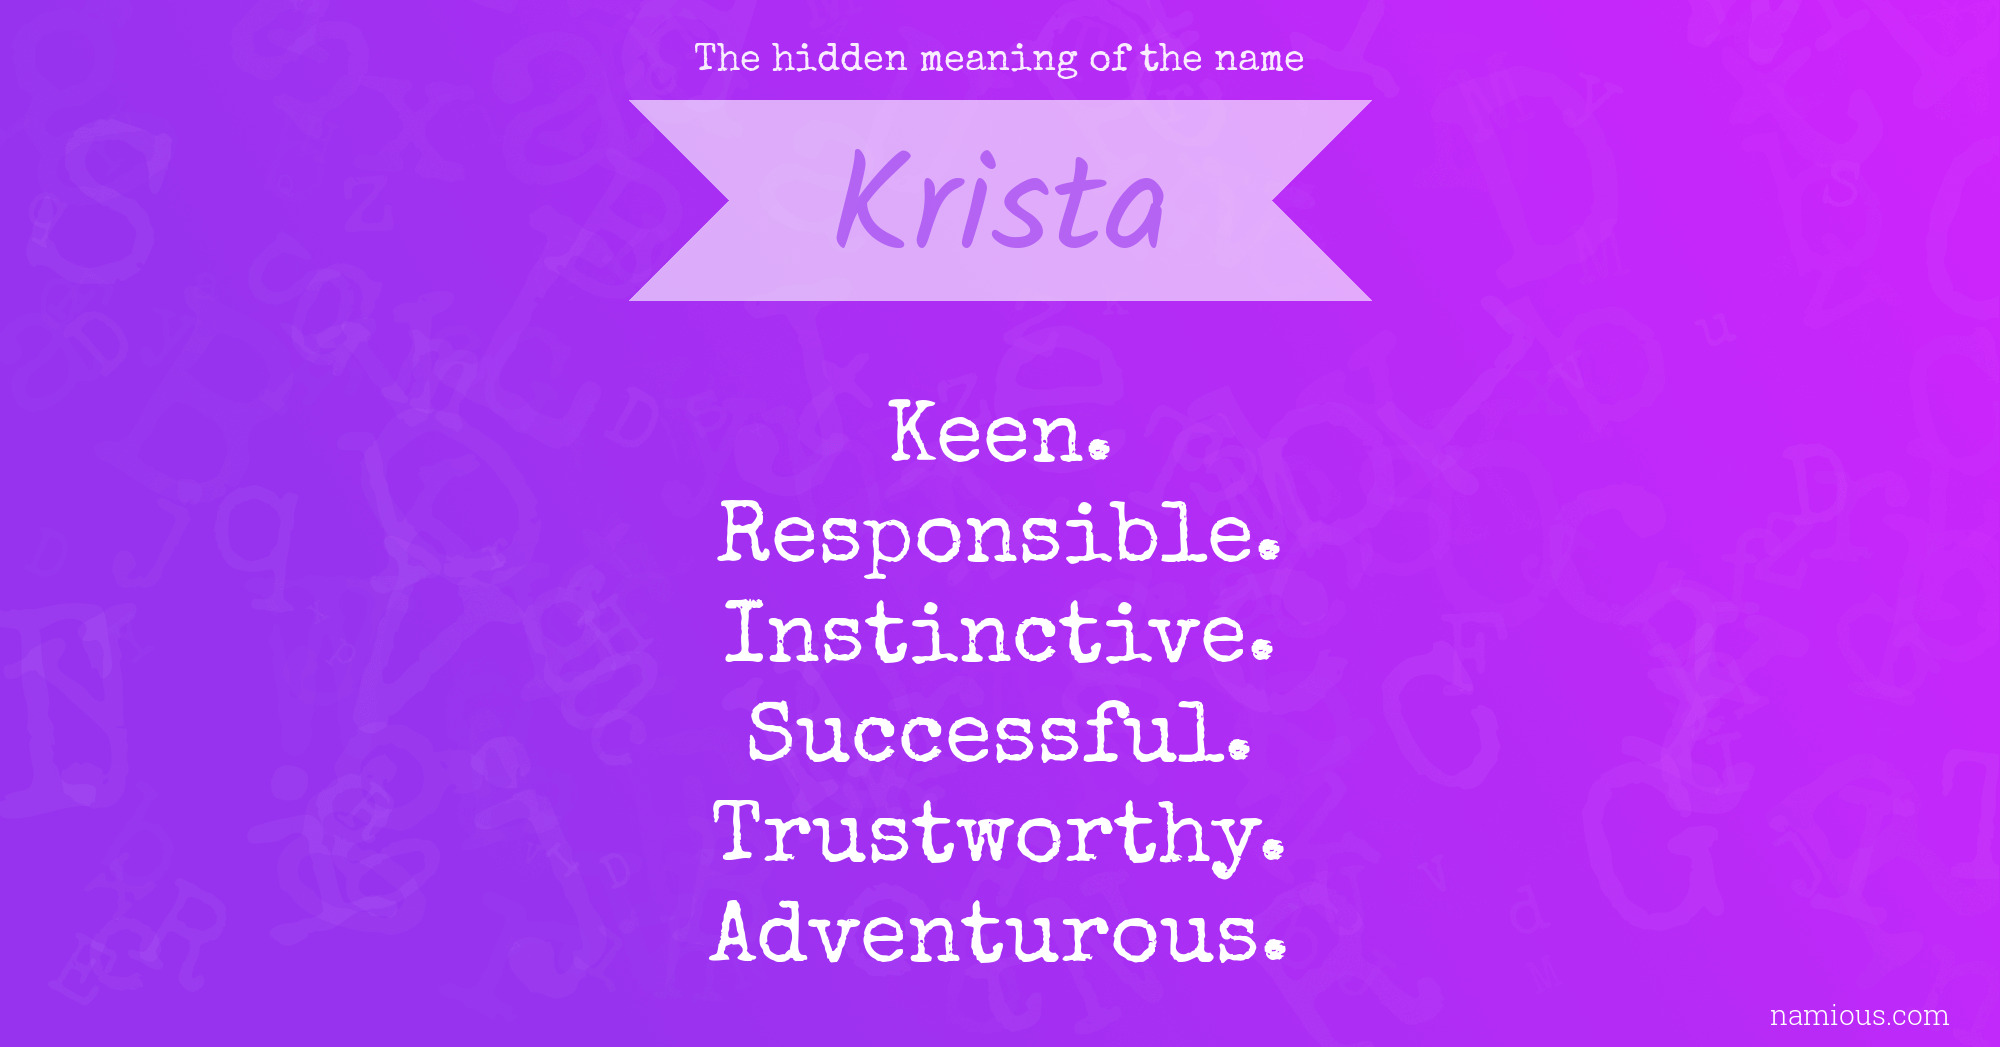 The hidden meaning of the name Krista